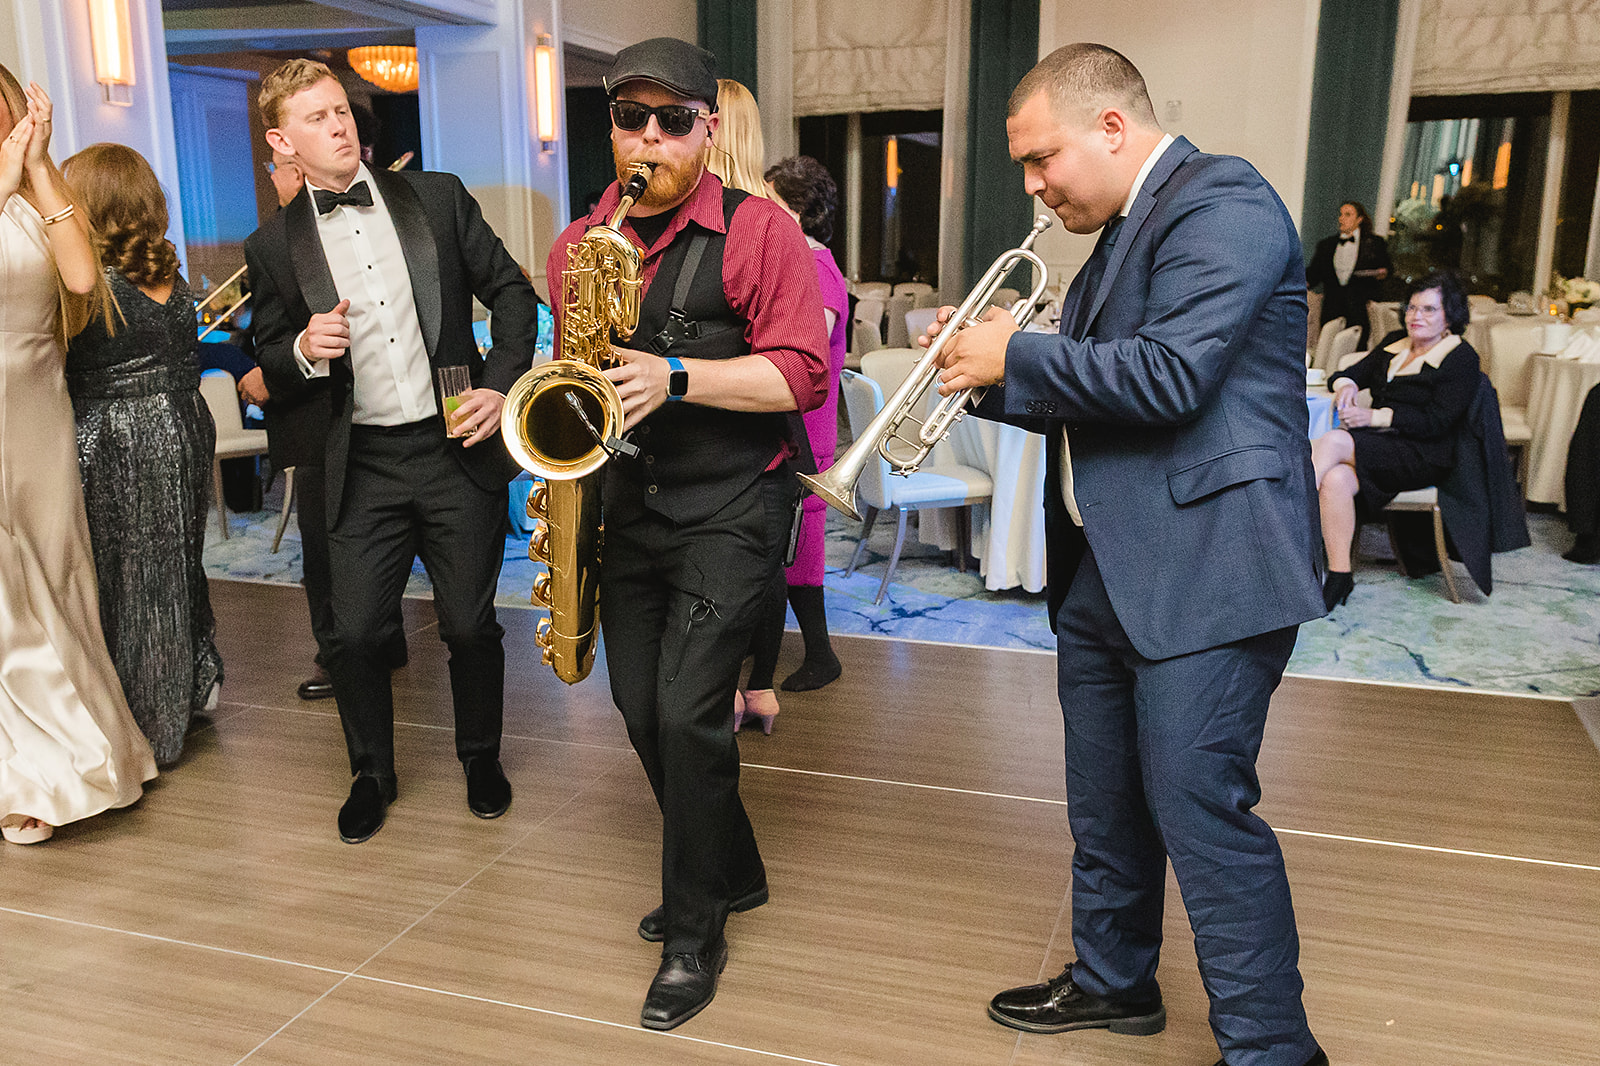 The Newbury Boston Wedding reception ballroom The Assembly The Zookeepers band